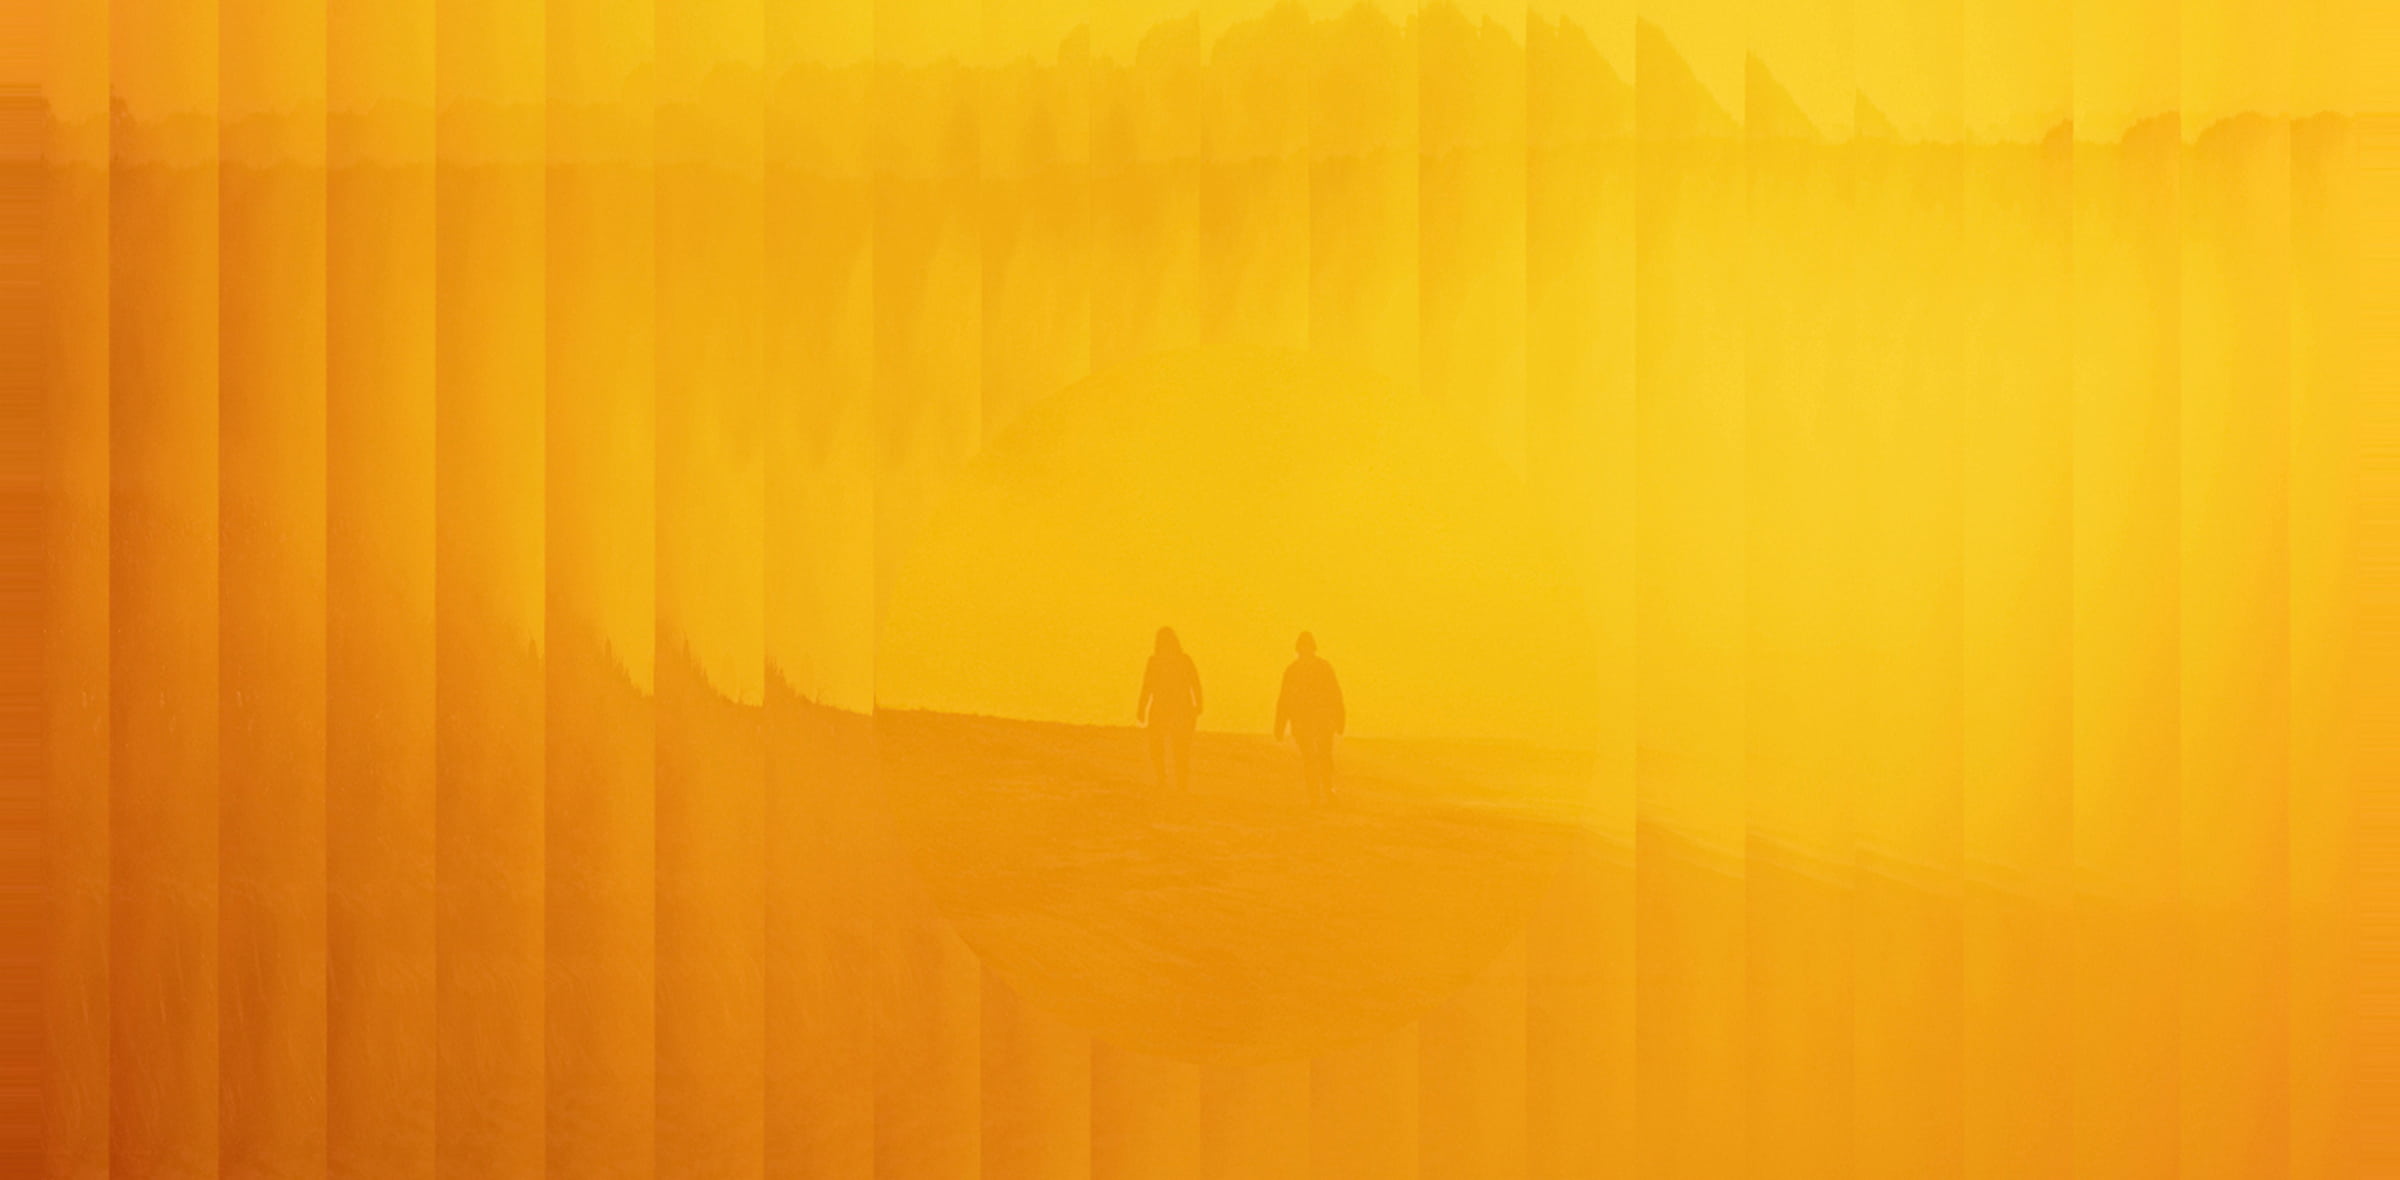 Home page image, distorted yellow landscape